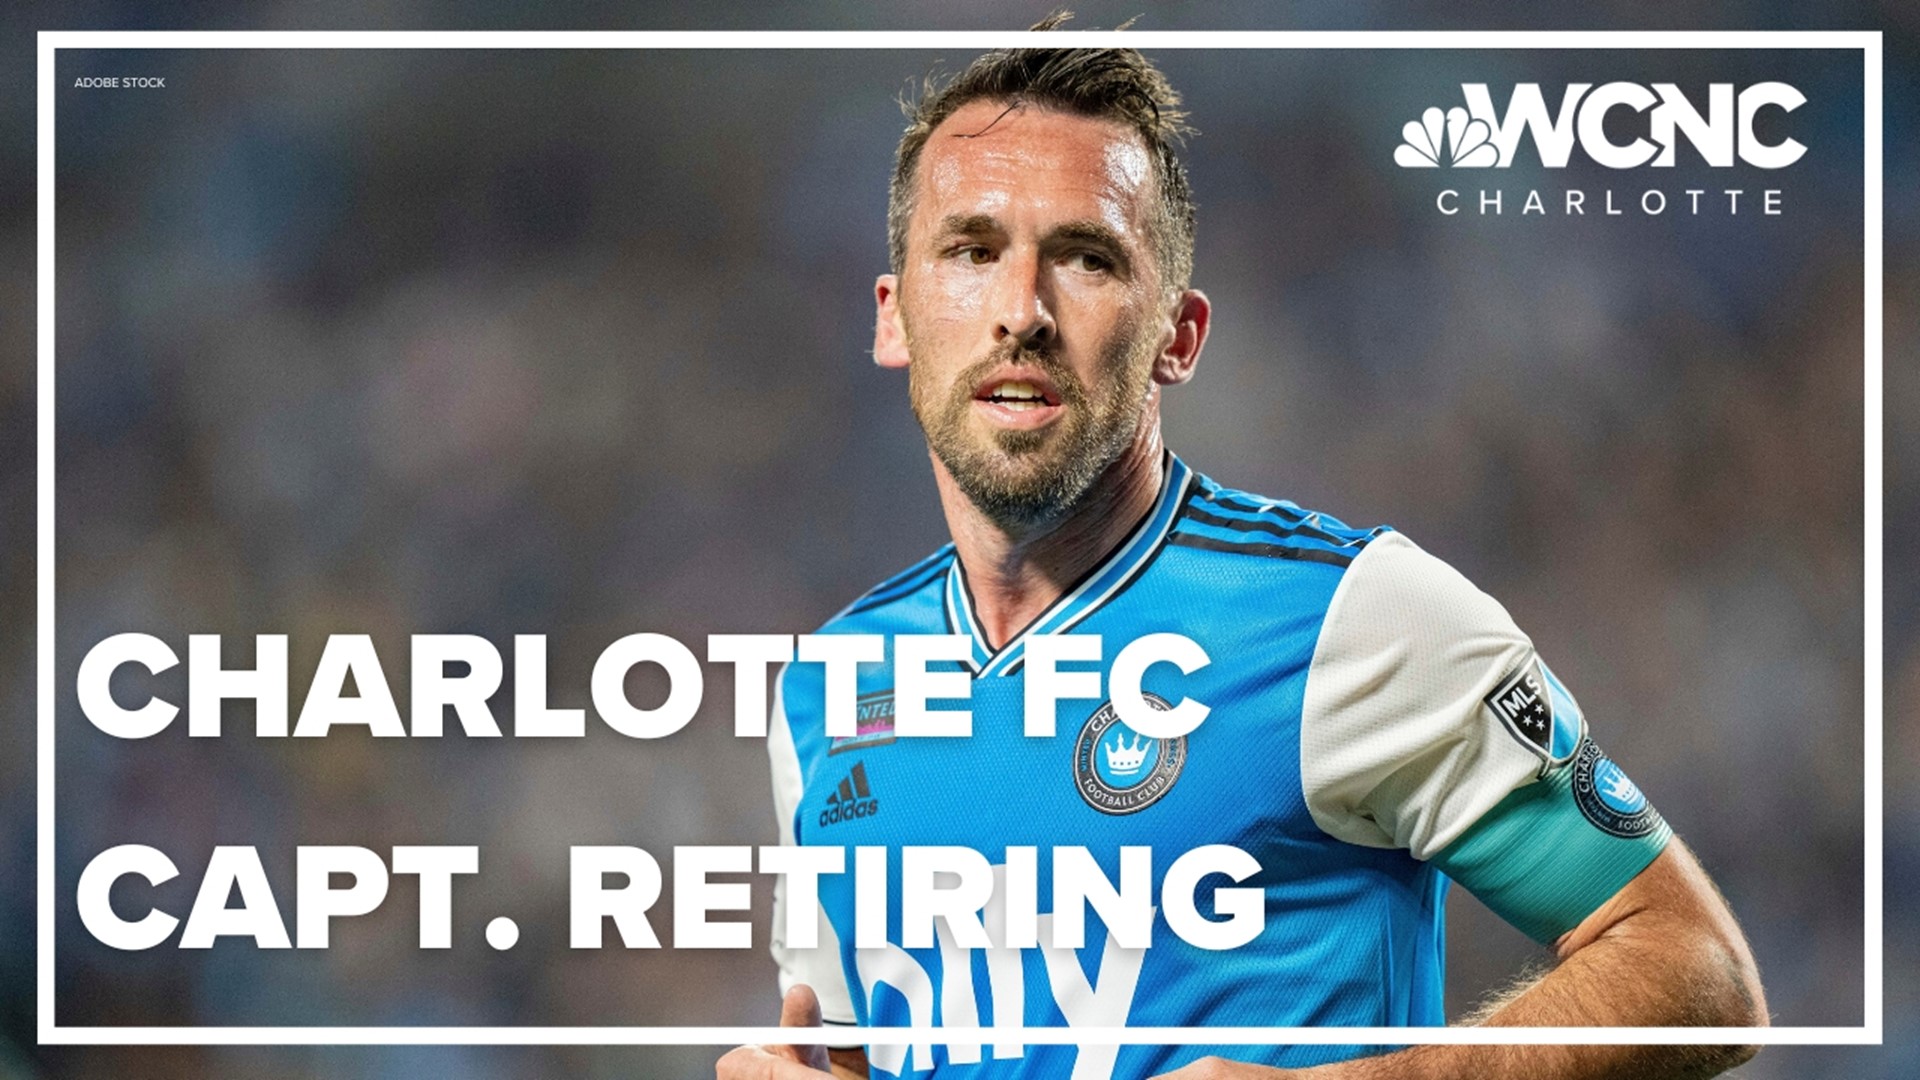 Charlotte FC's captain, Christian Fuchs, is retiring from professional soccer after 19 seasons.